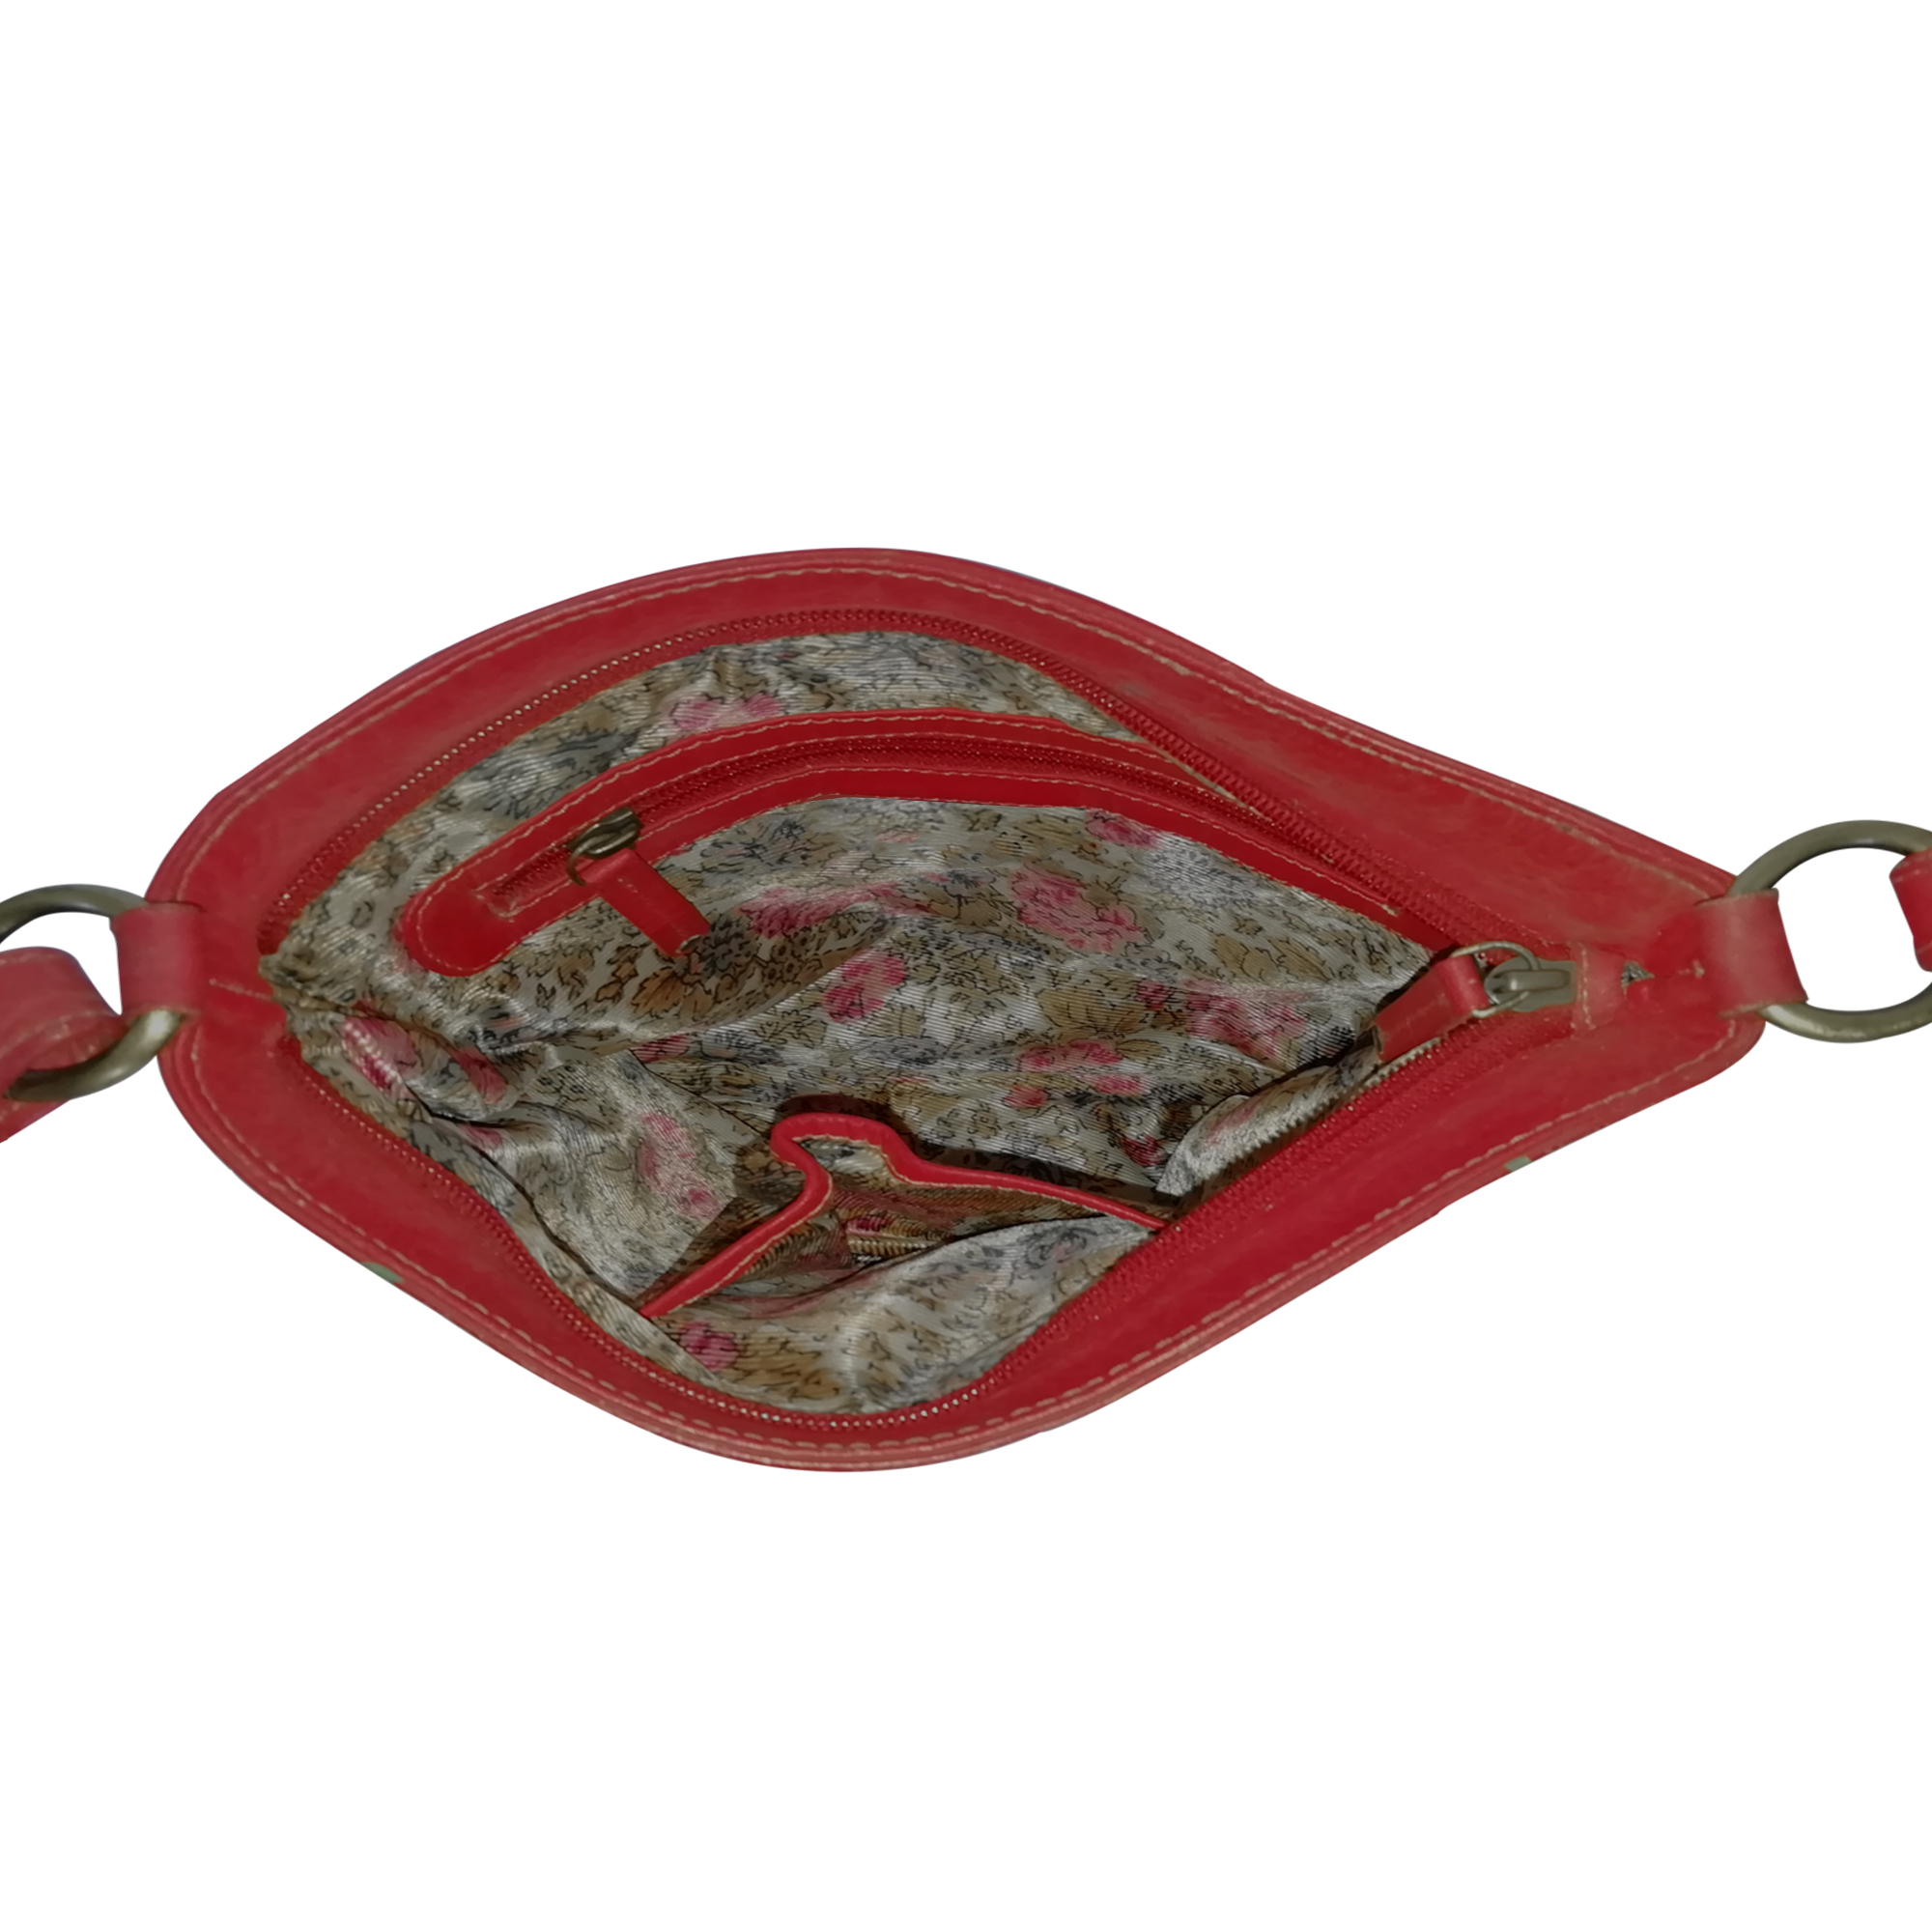 New Leather Hand Painted Sling Crossbody Shoulder Bag